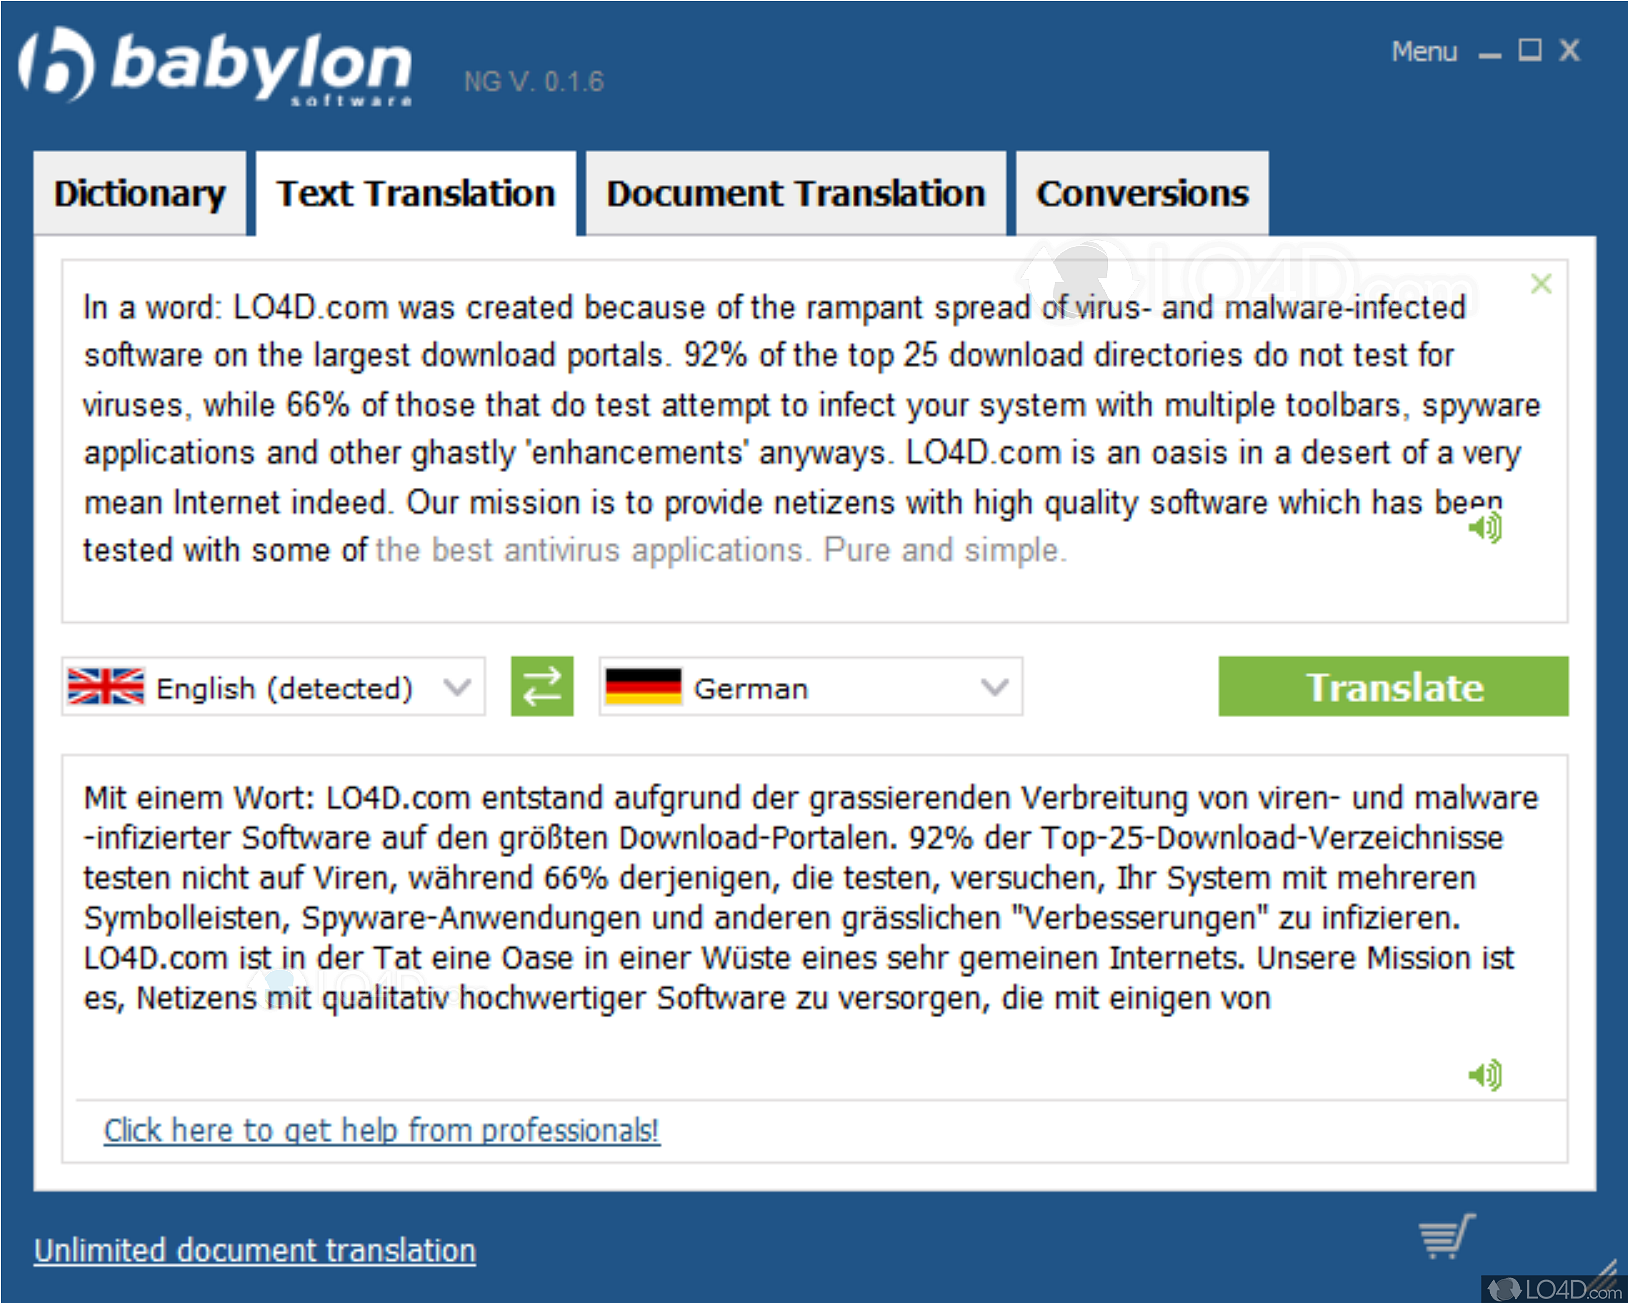 what to do with babylon dictionary